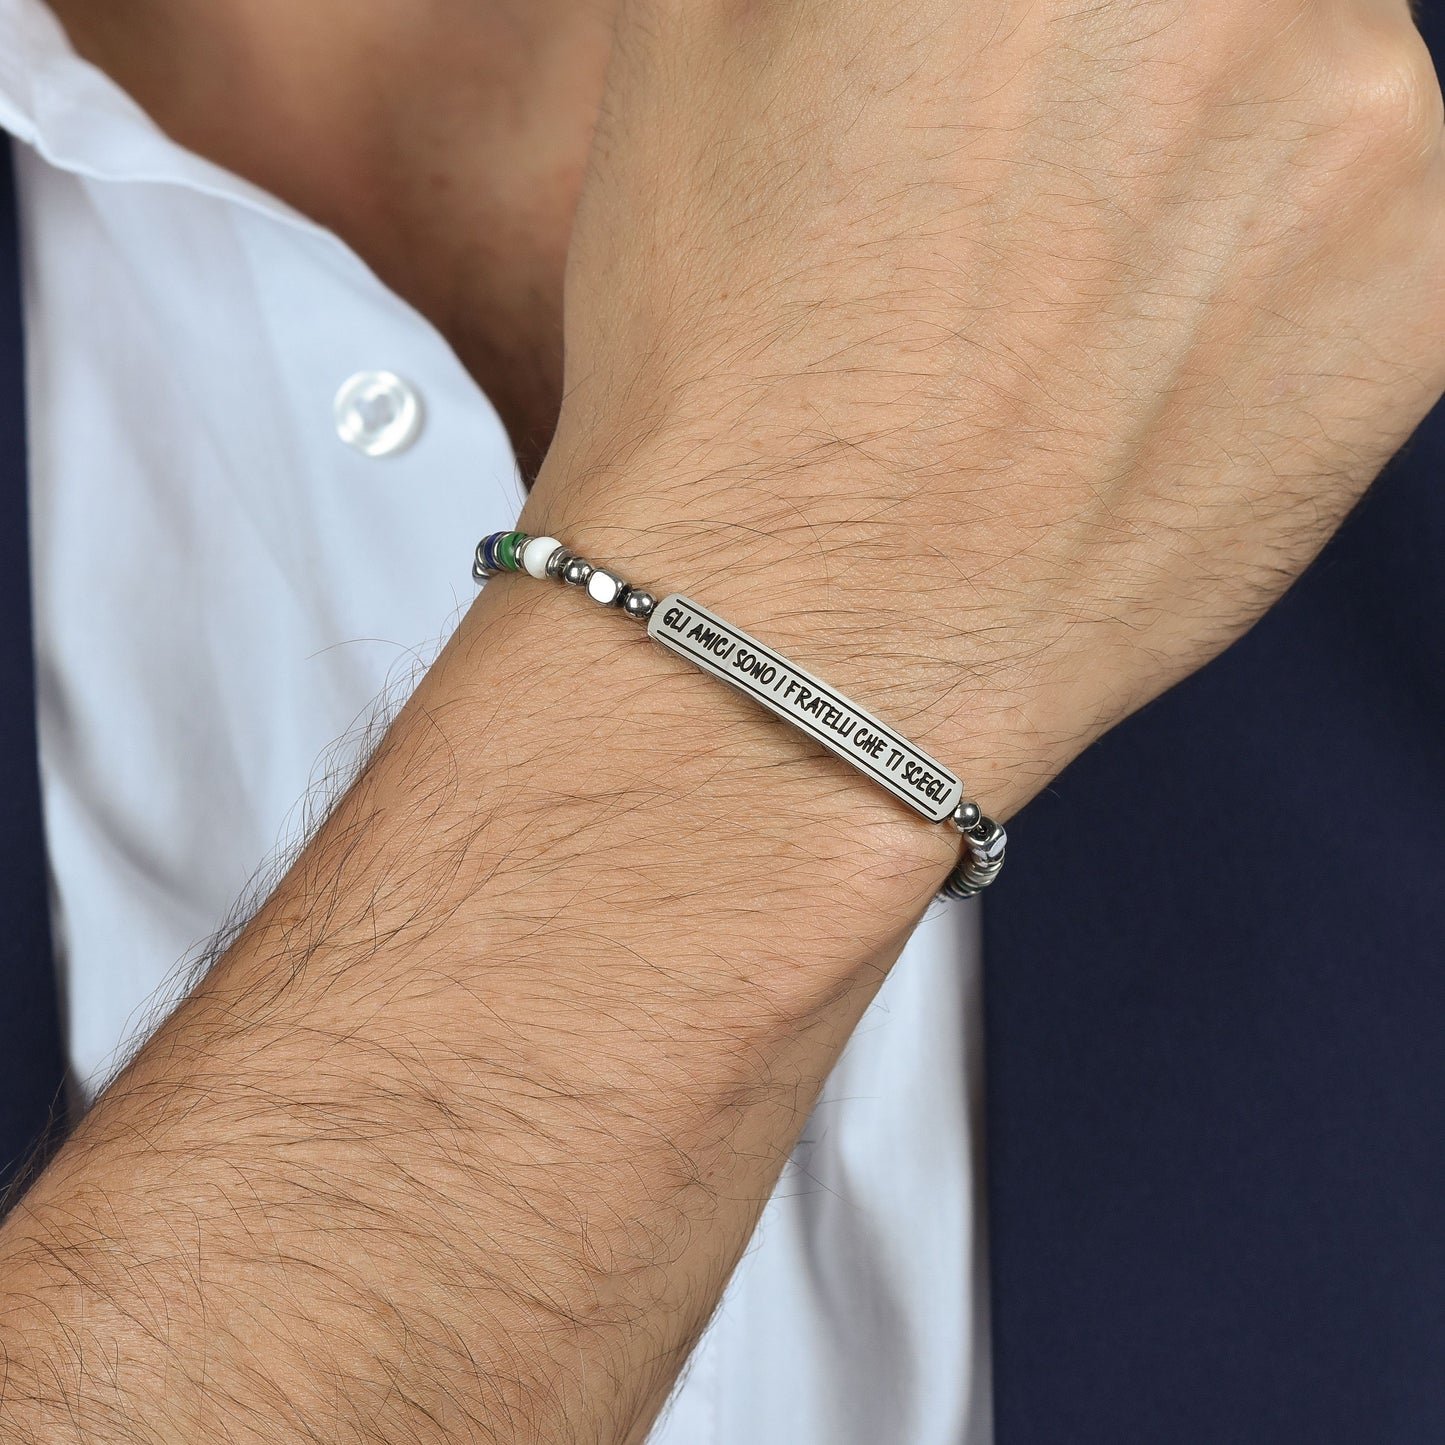 STEEL MEN'S BRACELET FRIENDS ARE THE BROTHERS YOU CHOOSE FOR YOURSELF